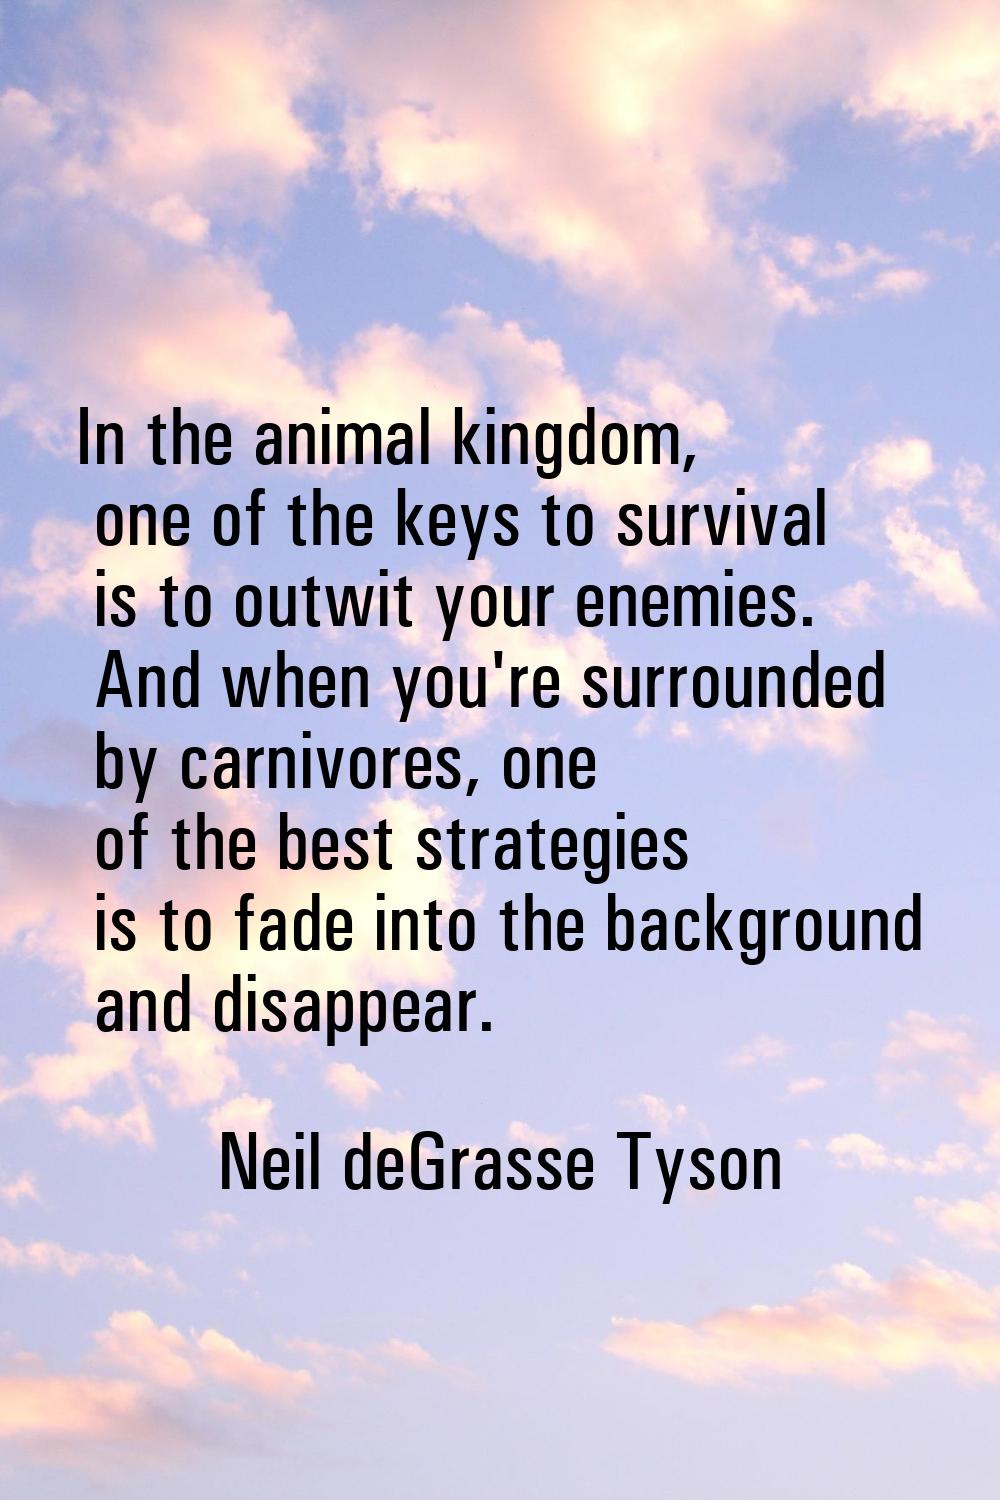 In the animal kingdom, one of the keys to survival is to outwit your enemies. And when you're surro